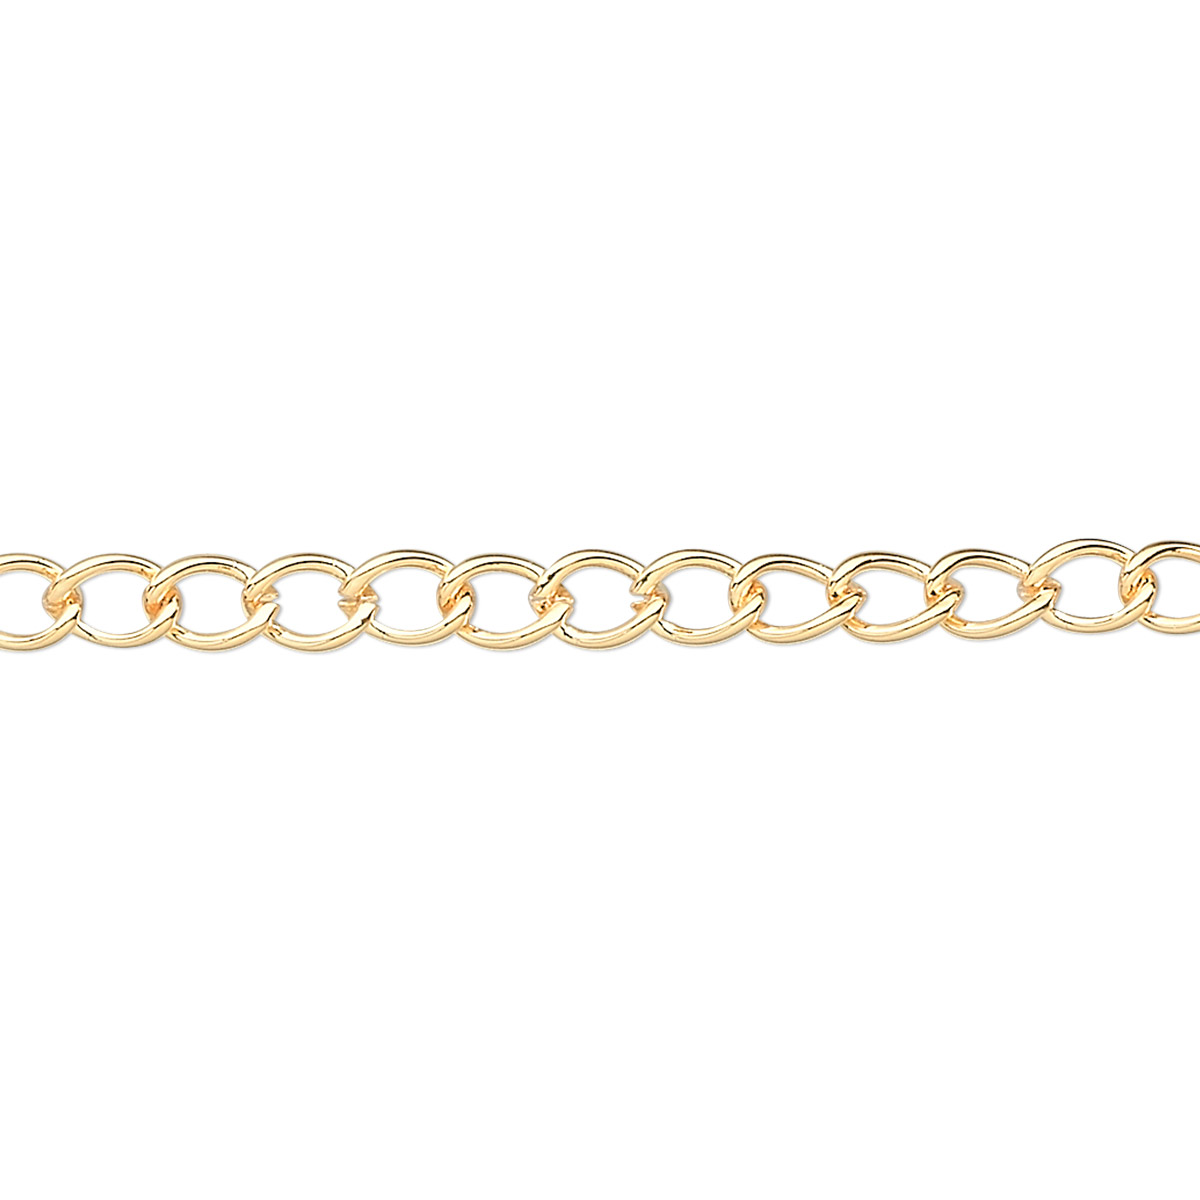 Chain, gold-plated brass, 3.5mm curb. Sold per pkg of 5 feet. - Fire ...